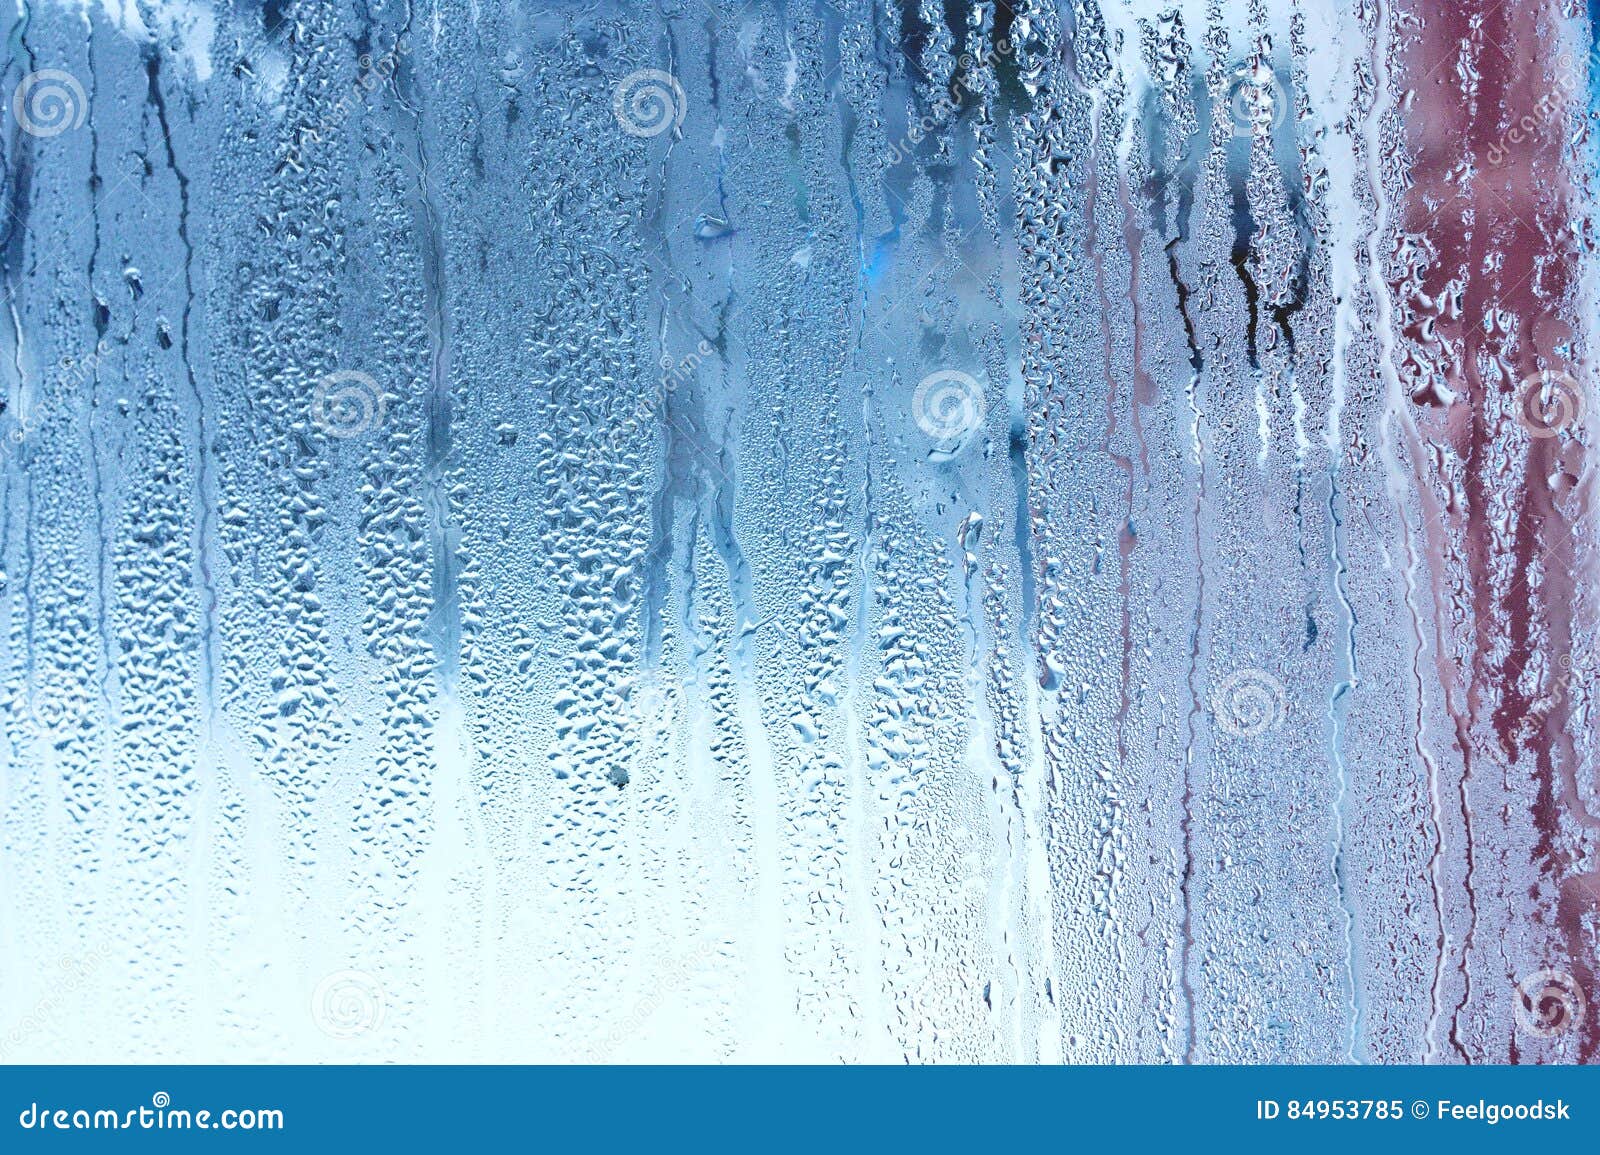 window glass with condensation, high humidity in the room, large water droplets, cold tone